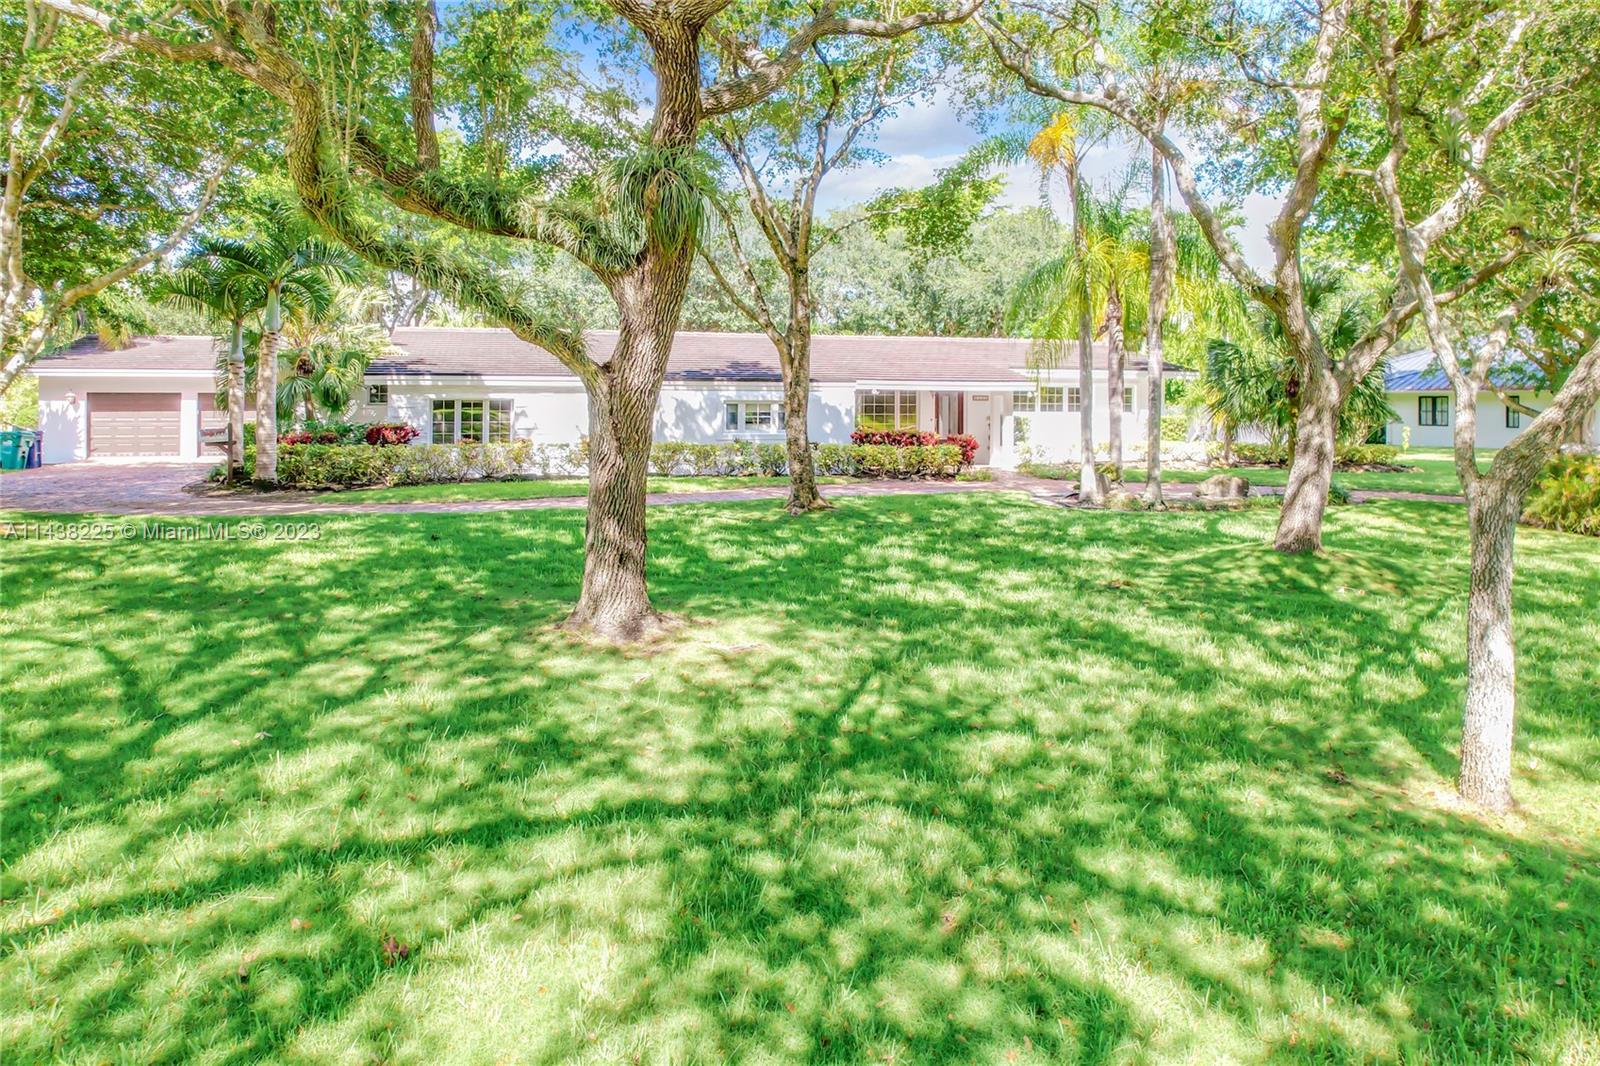 REDUCED! Large 5000 Sqft, Pinecrest, Prestigious cul-de-sac, Extremely Private street. Best Priced 4 Bedrooms with Pool East of 67th Ave. Large Entertainment area with built in BBQ. Close to Schools. All Pets are OK.